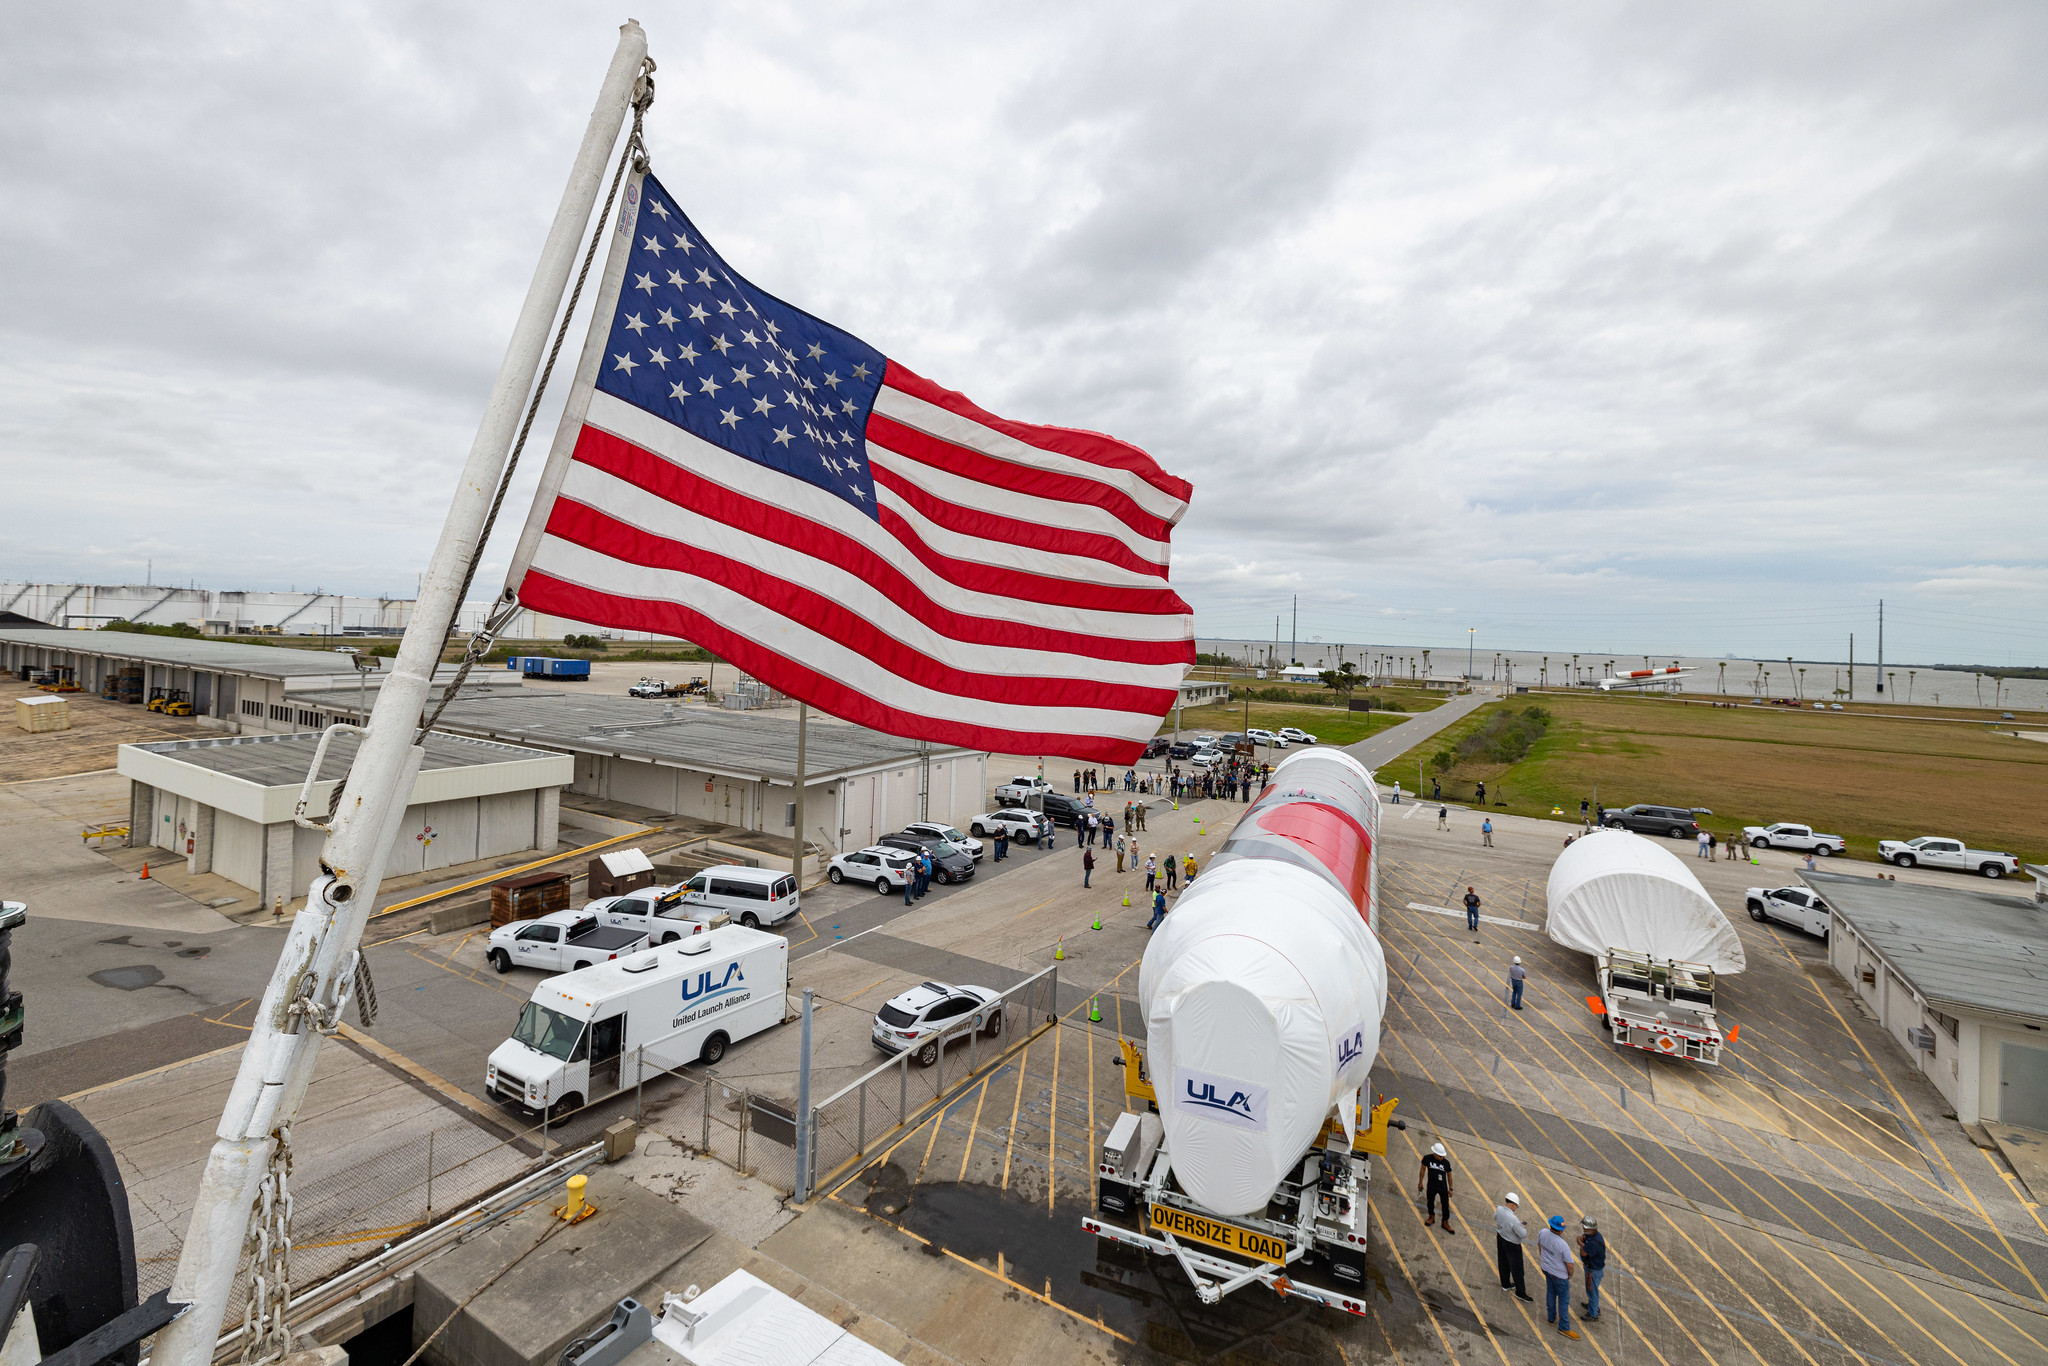 The Vulcan rocket's first stage arrives at Cape Canaveral. Photo by United Launch Alliance